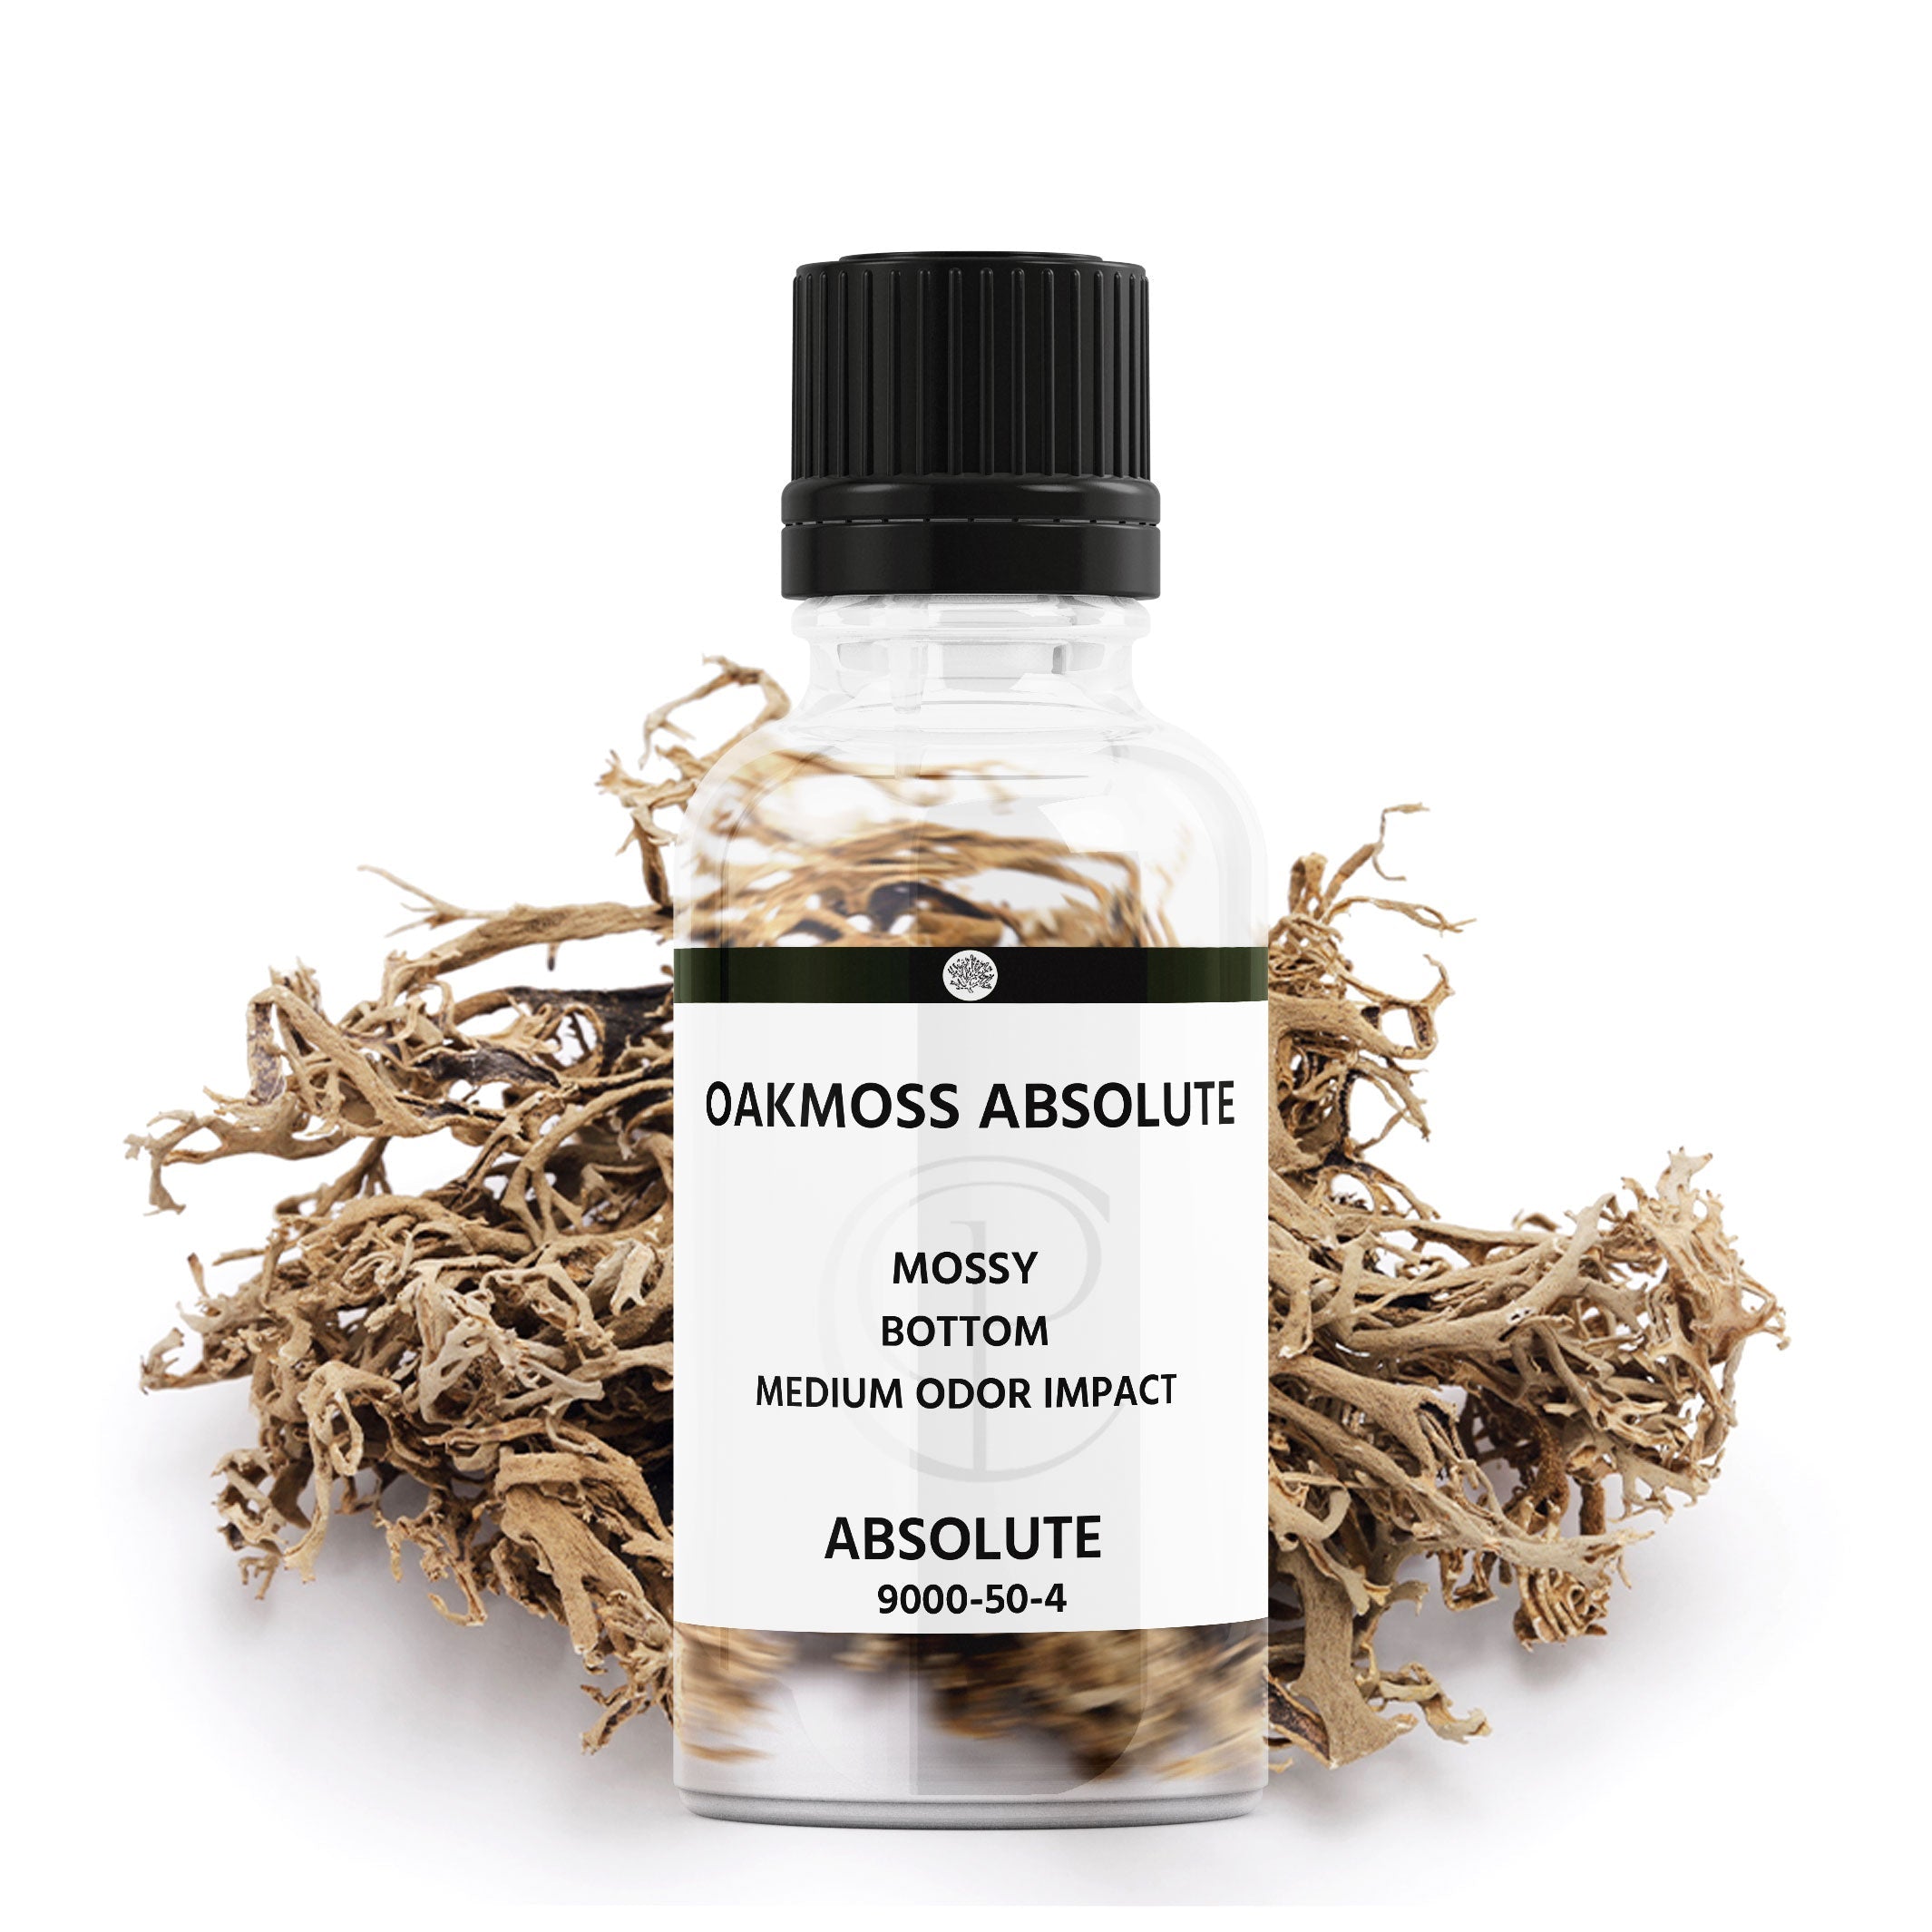 Oakmoss Absolute for natural perfumery from